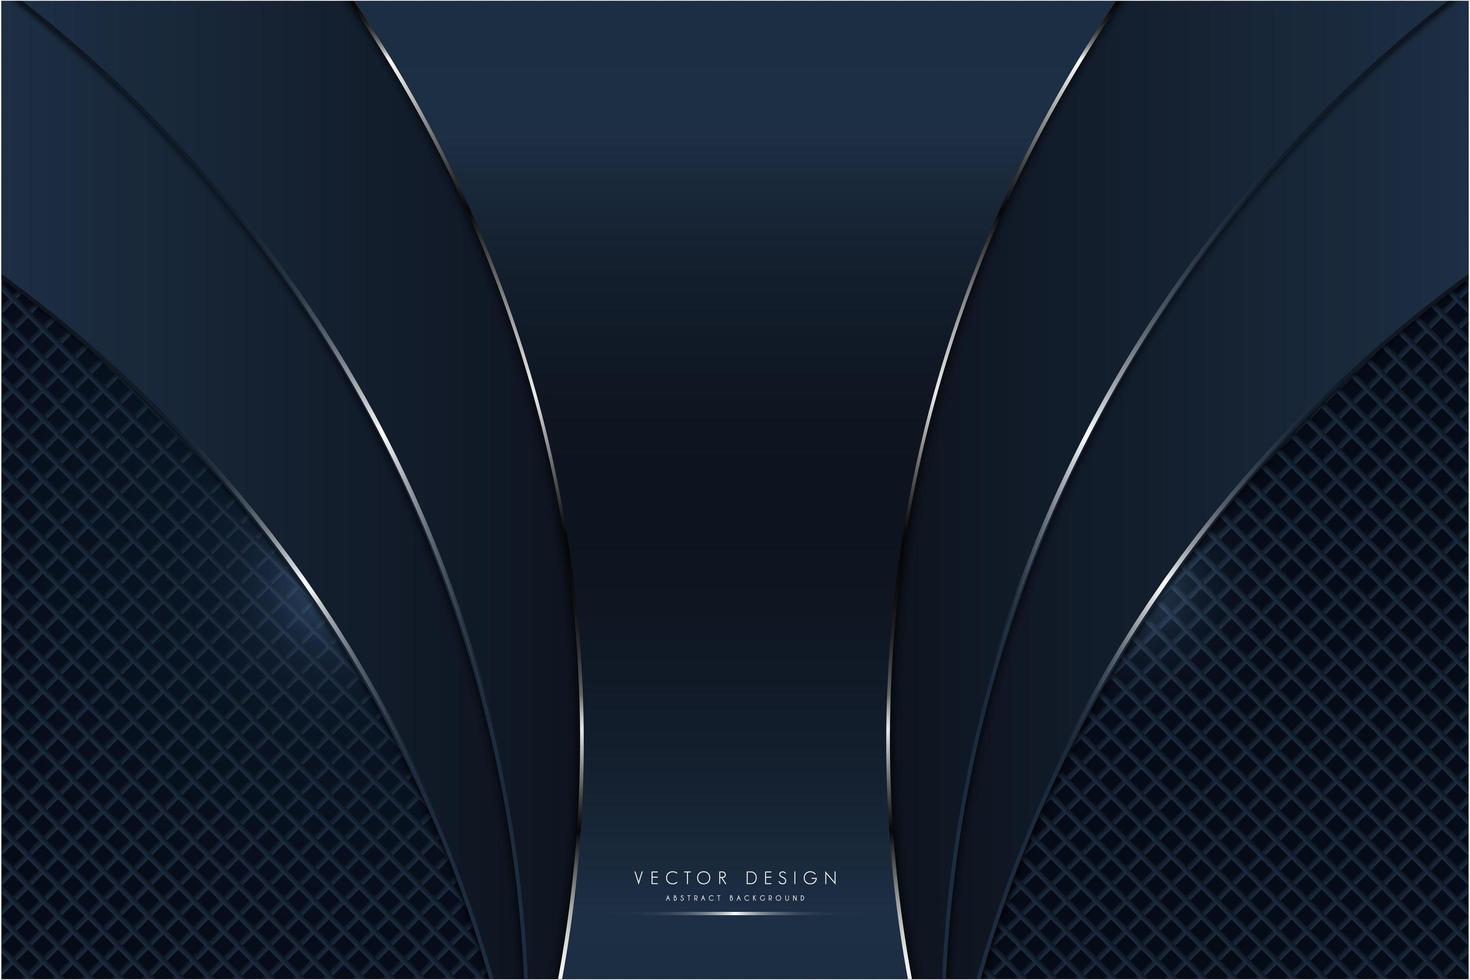 Navy curved metallic panels with glow over diamond pattern vector